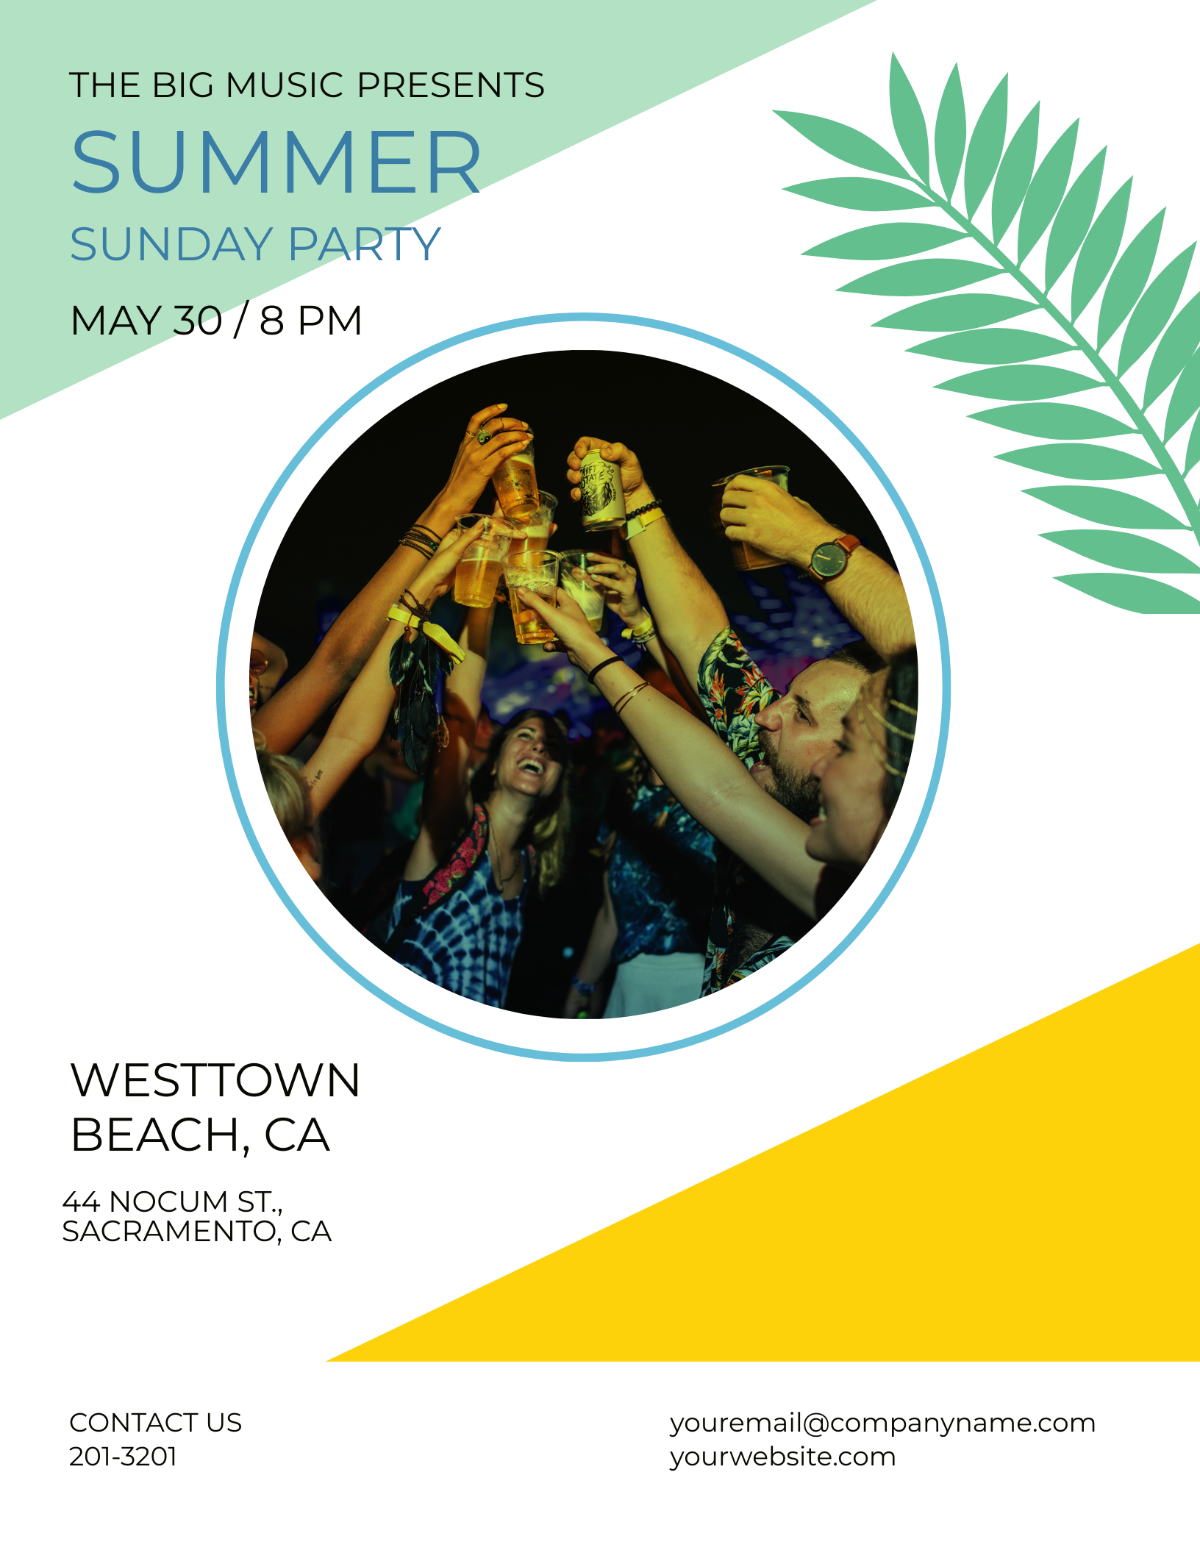 Summer Sunday Party Flyer